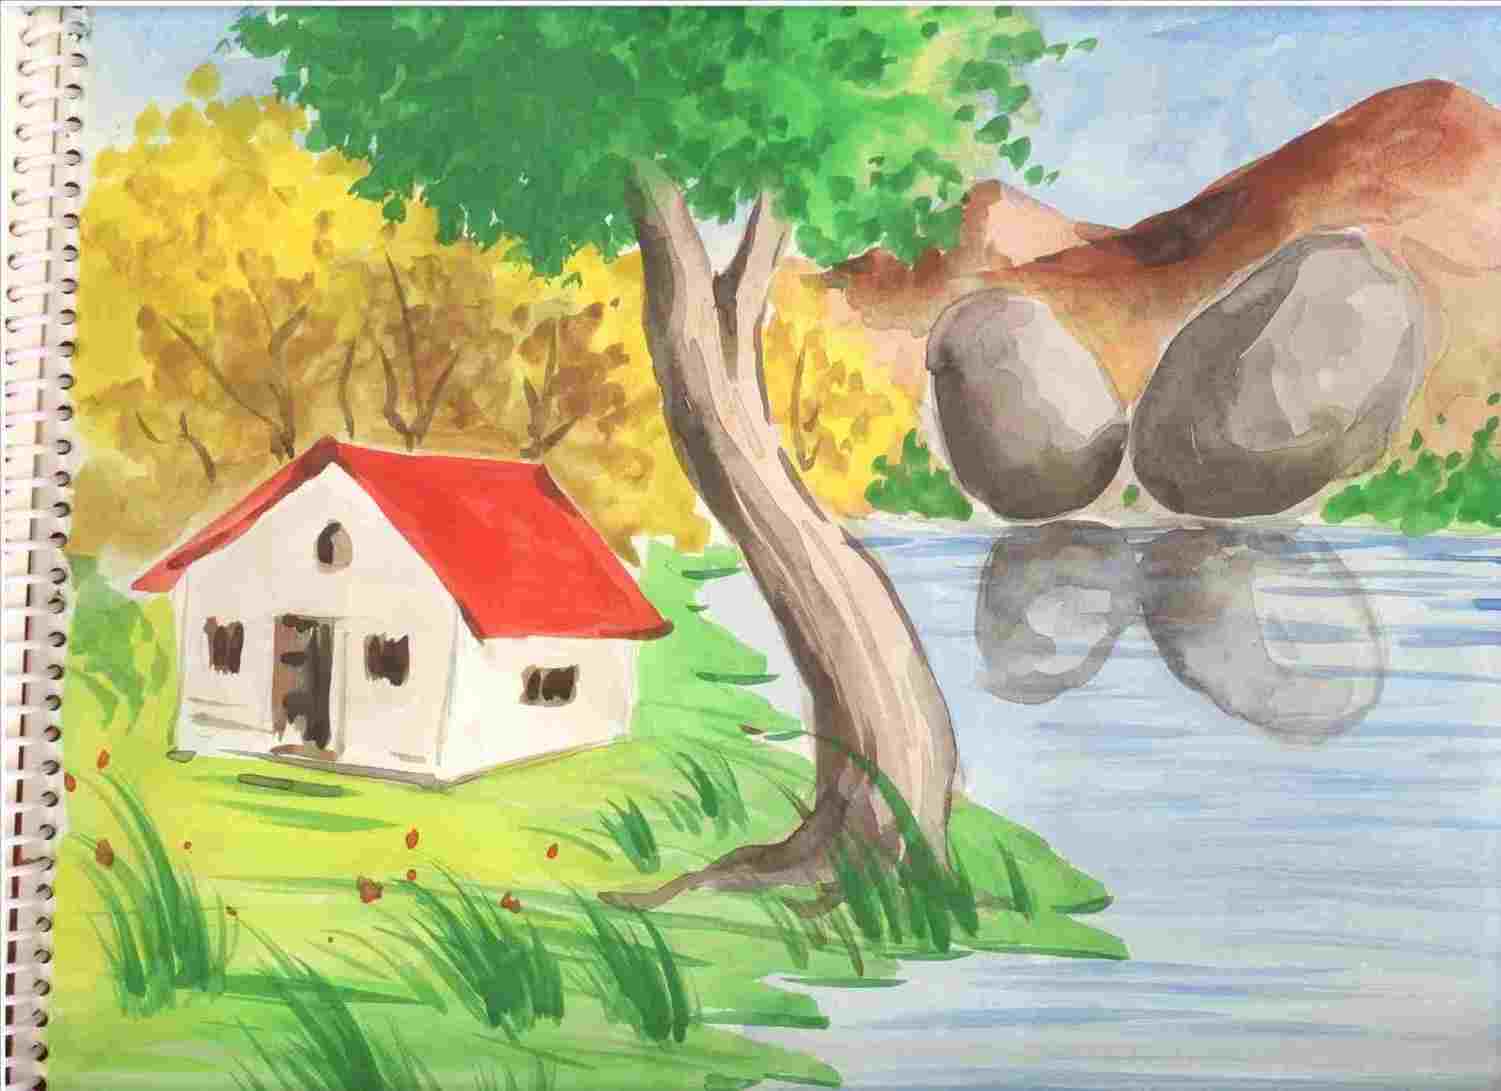 Easy Nature Scenery Drawing - YouTube